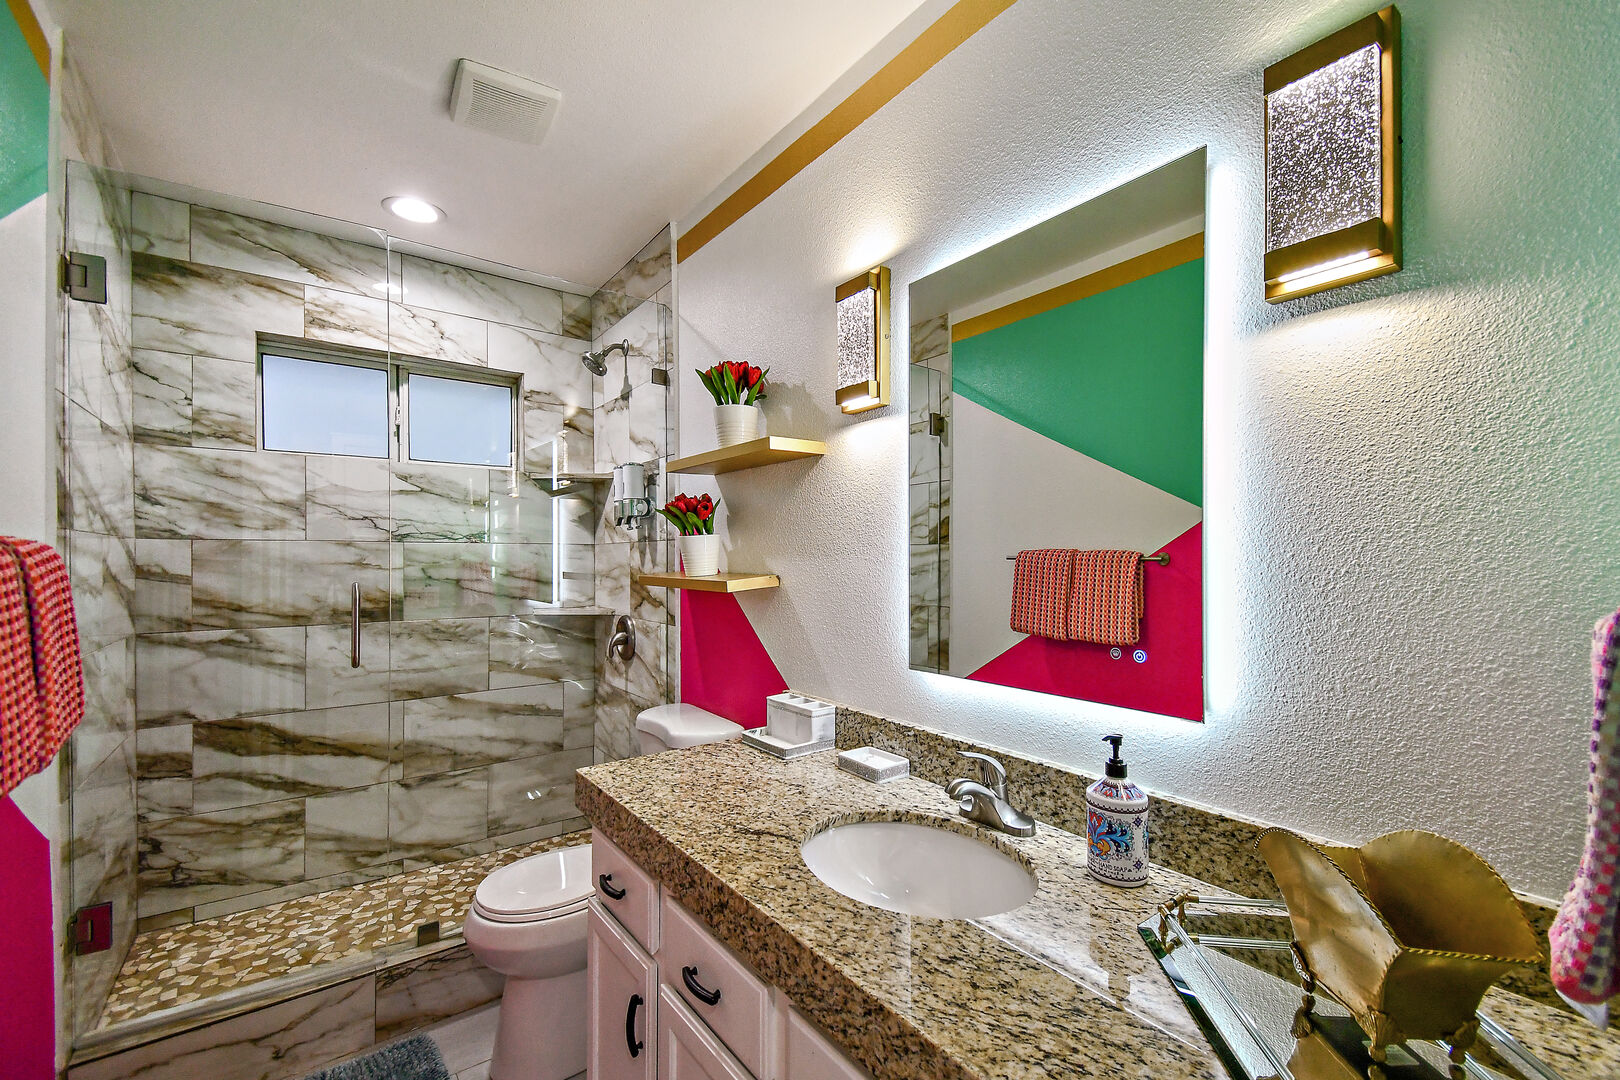 Hallway bathroom 2 is located next to bedroom 2 and features a tile shower and a vanity sink.